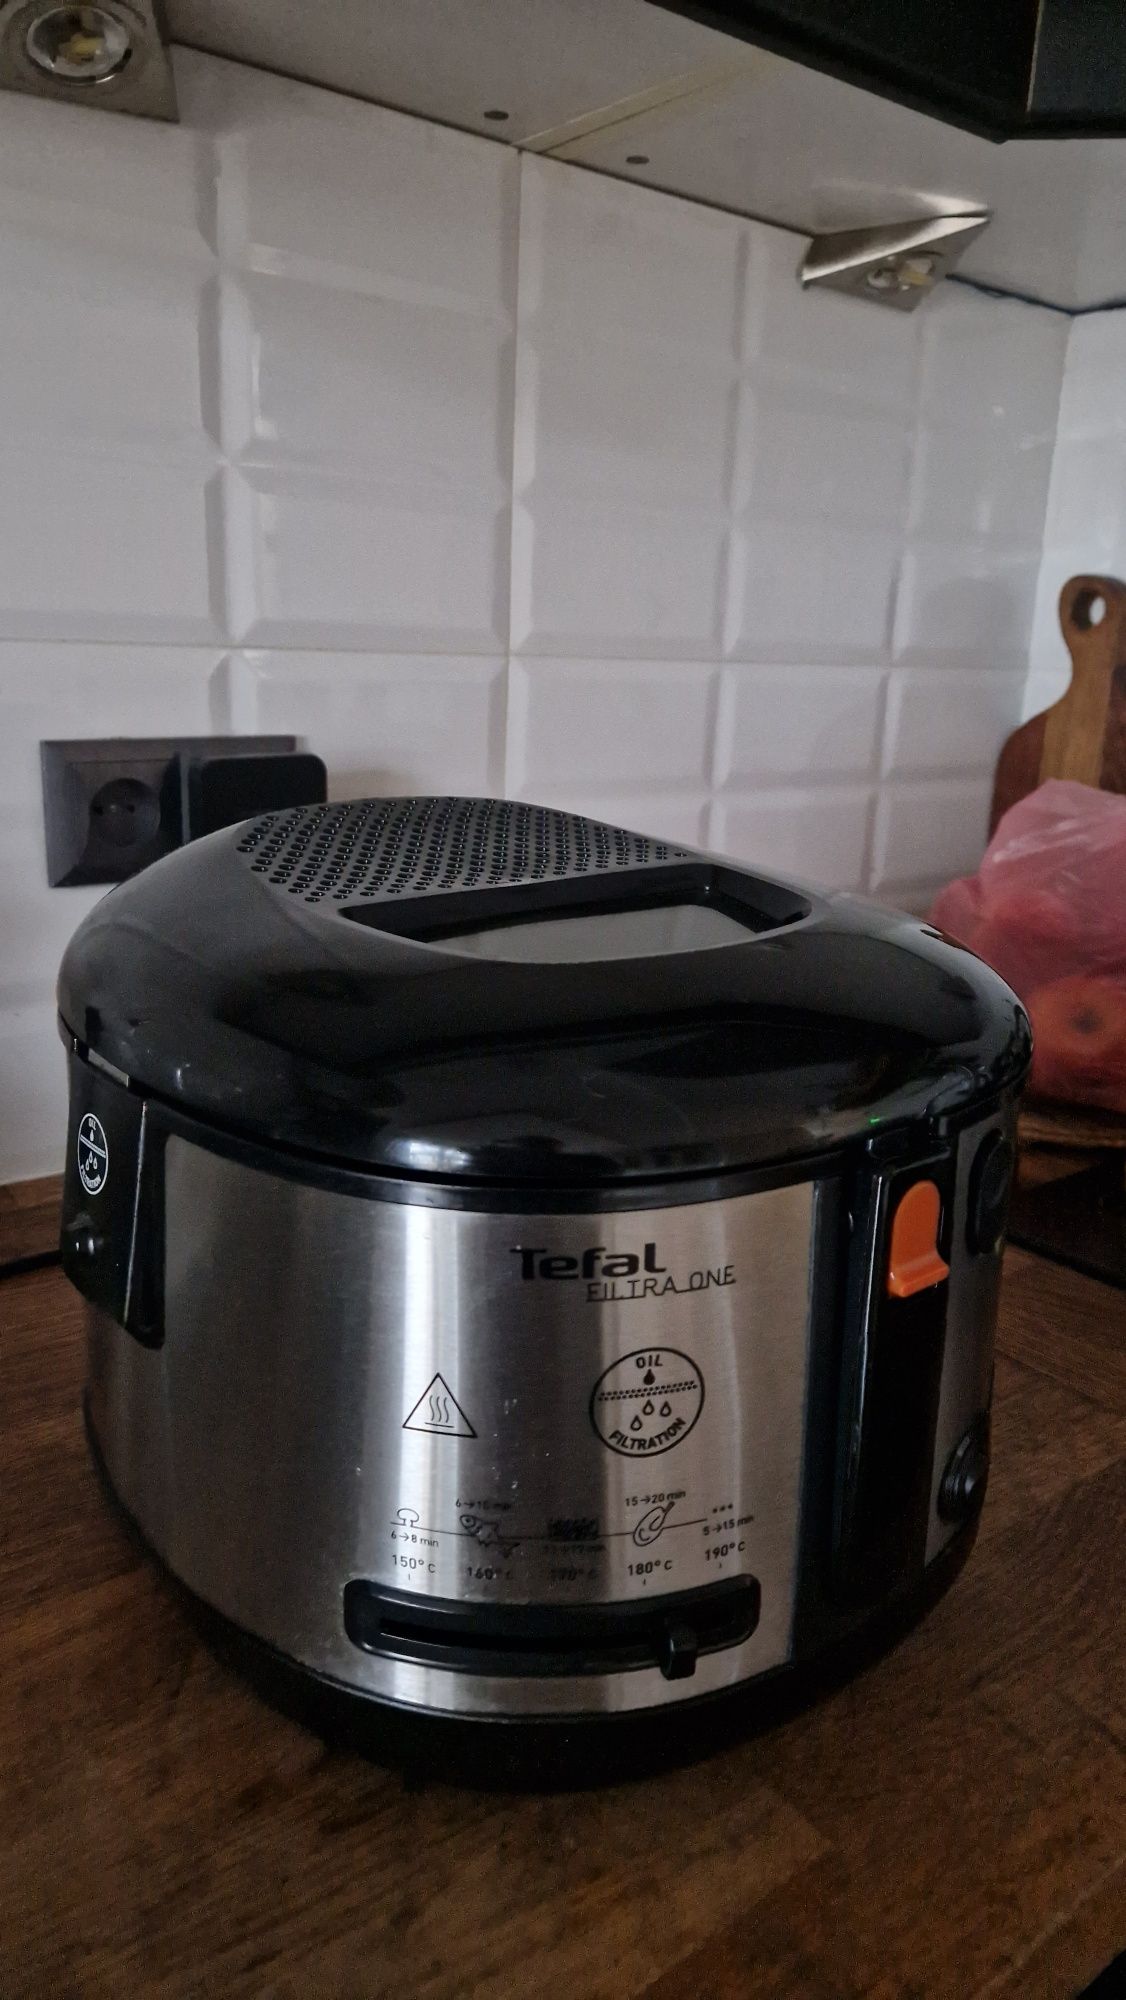 Frytkownica tefal filtra one